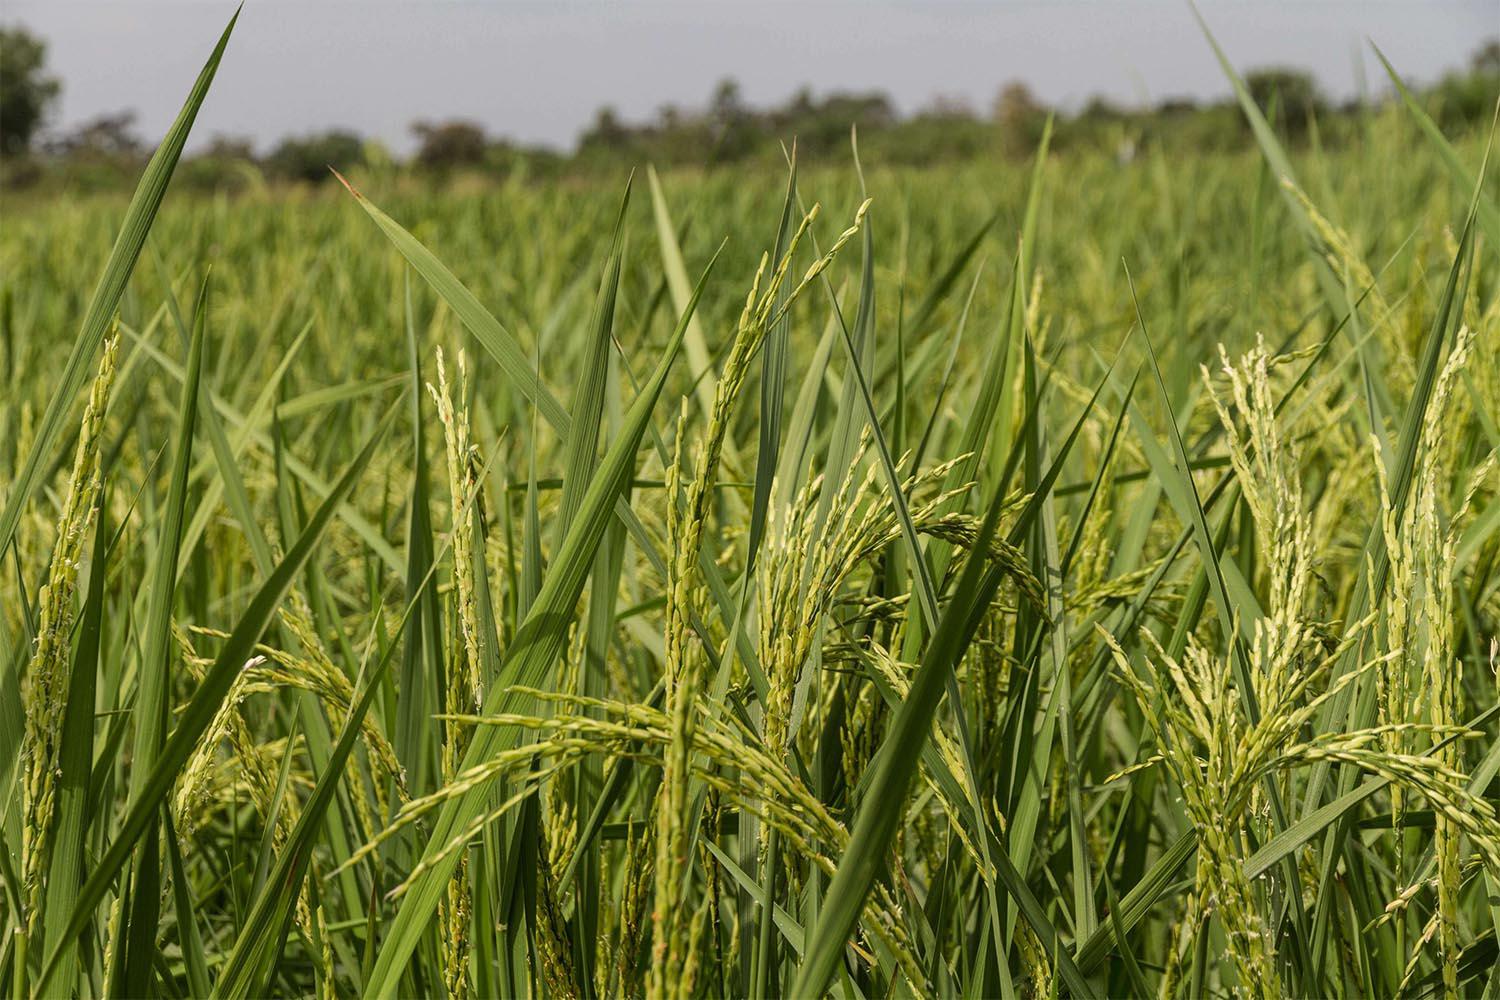 Mali's grain export ban came in to effect on Monday